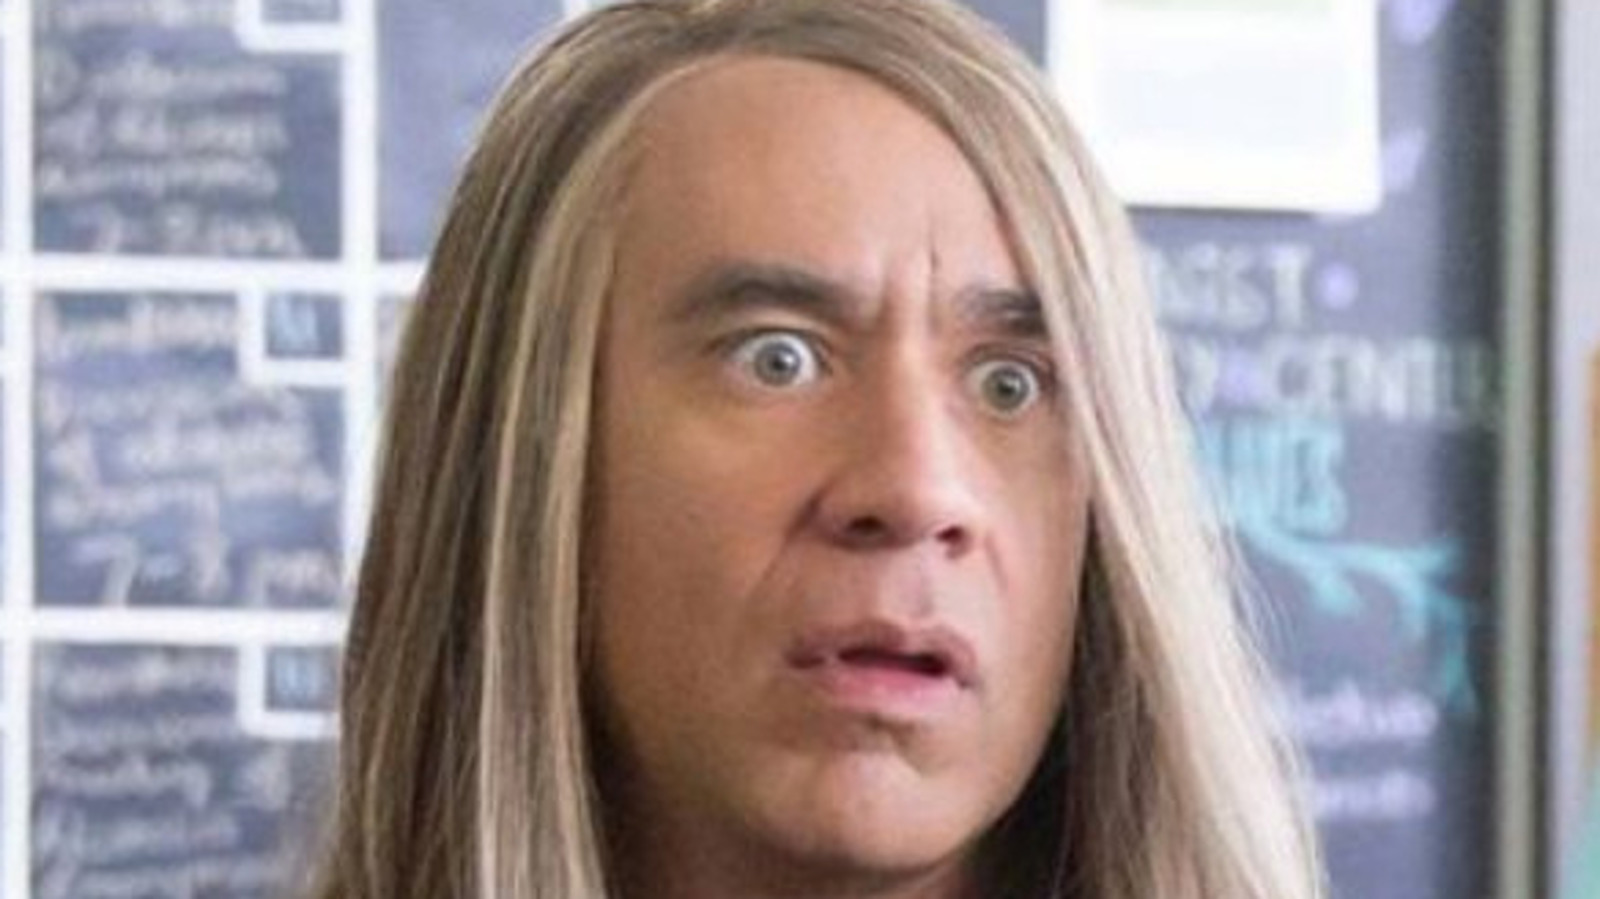 Portlandia: Watch the Trailer for the 8th and Final Season